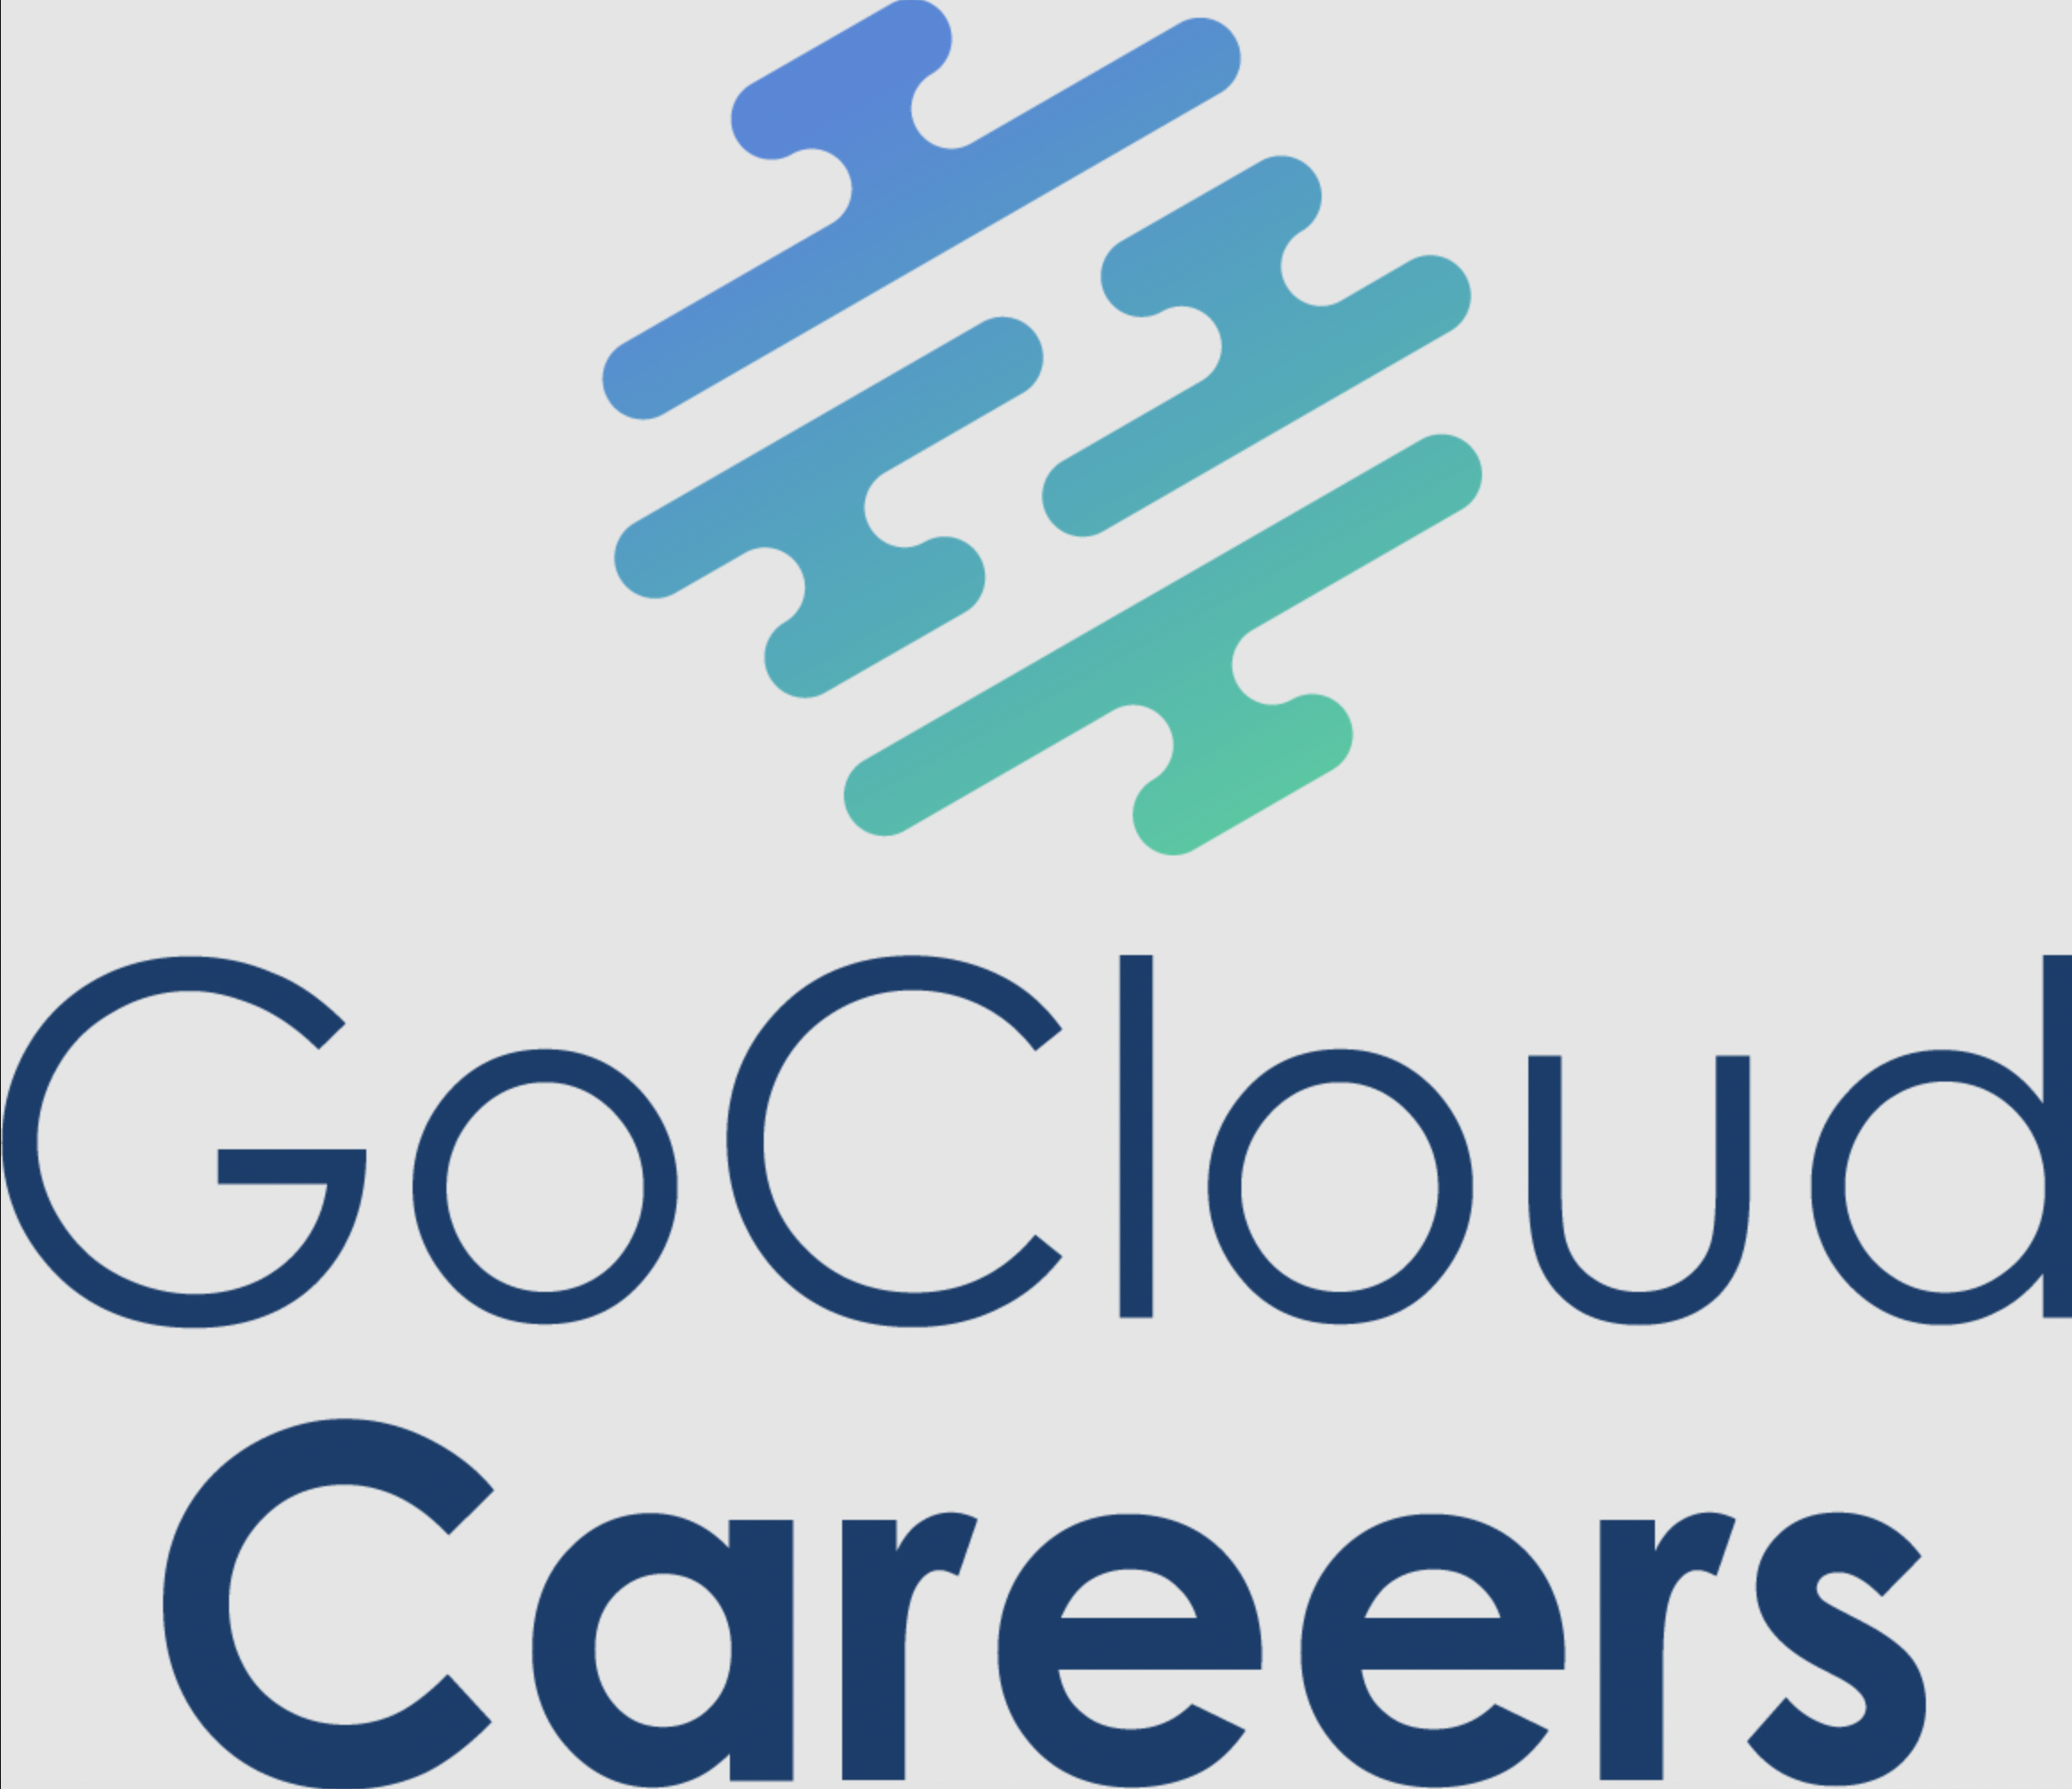 Go Cloud Careers Announces Collaboration With University of Tennessee at Martin